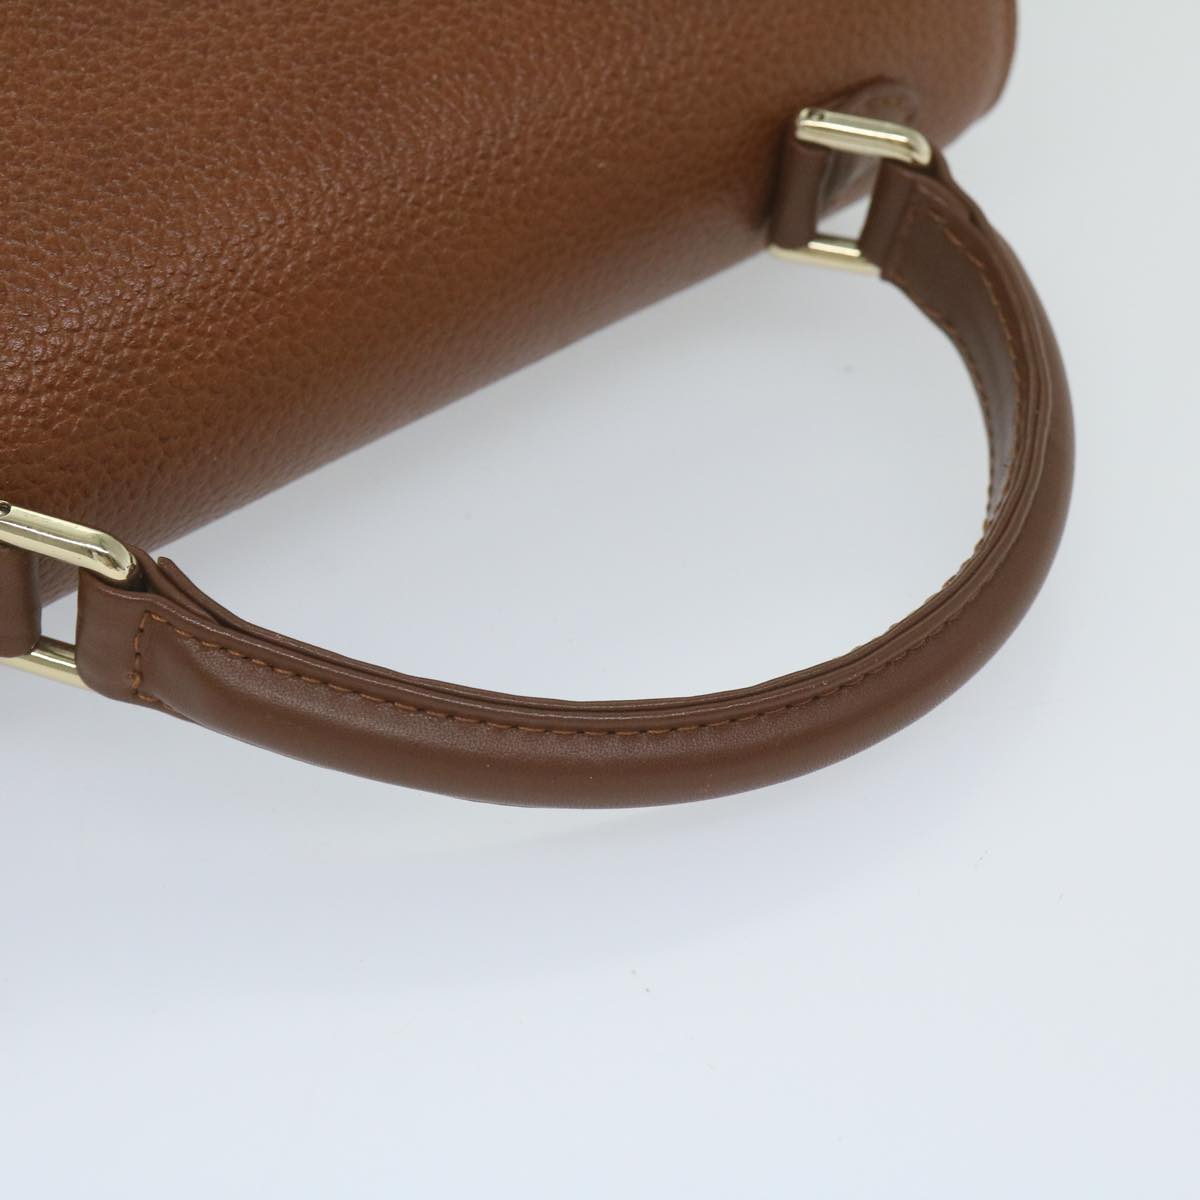 Burberrys Hand Bag Leather Brown Auth hk974